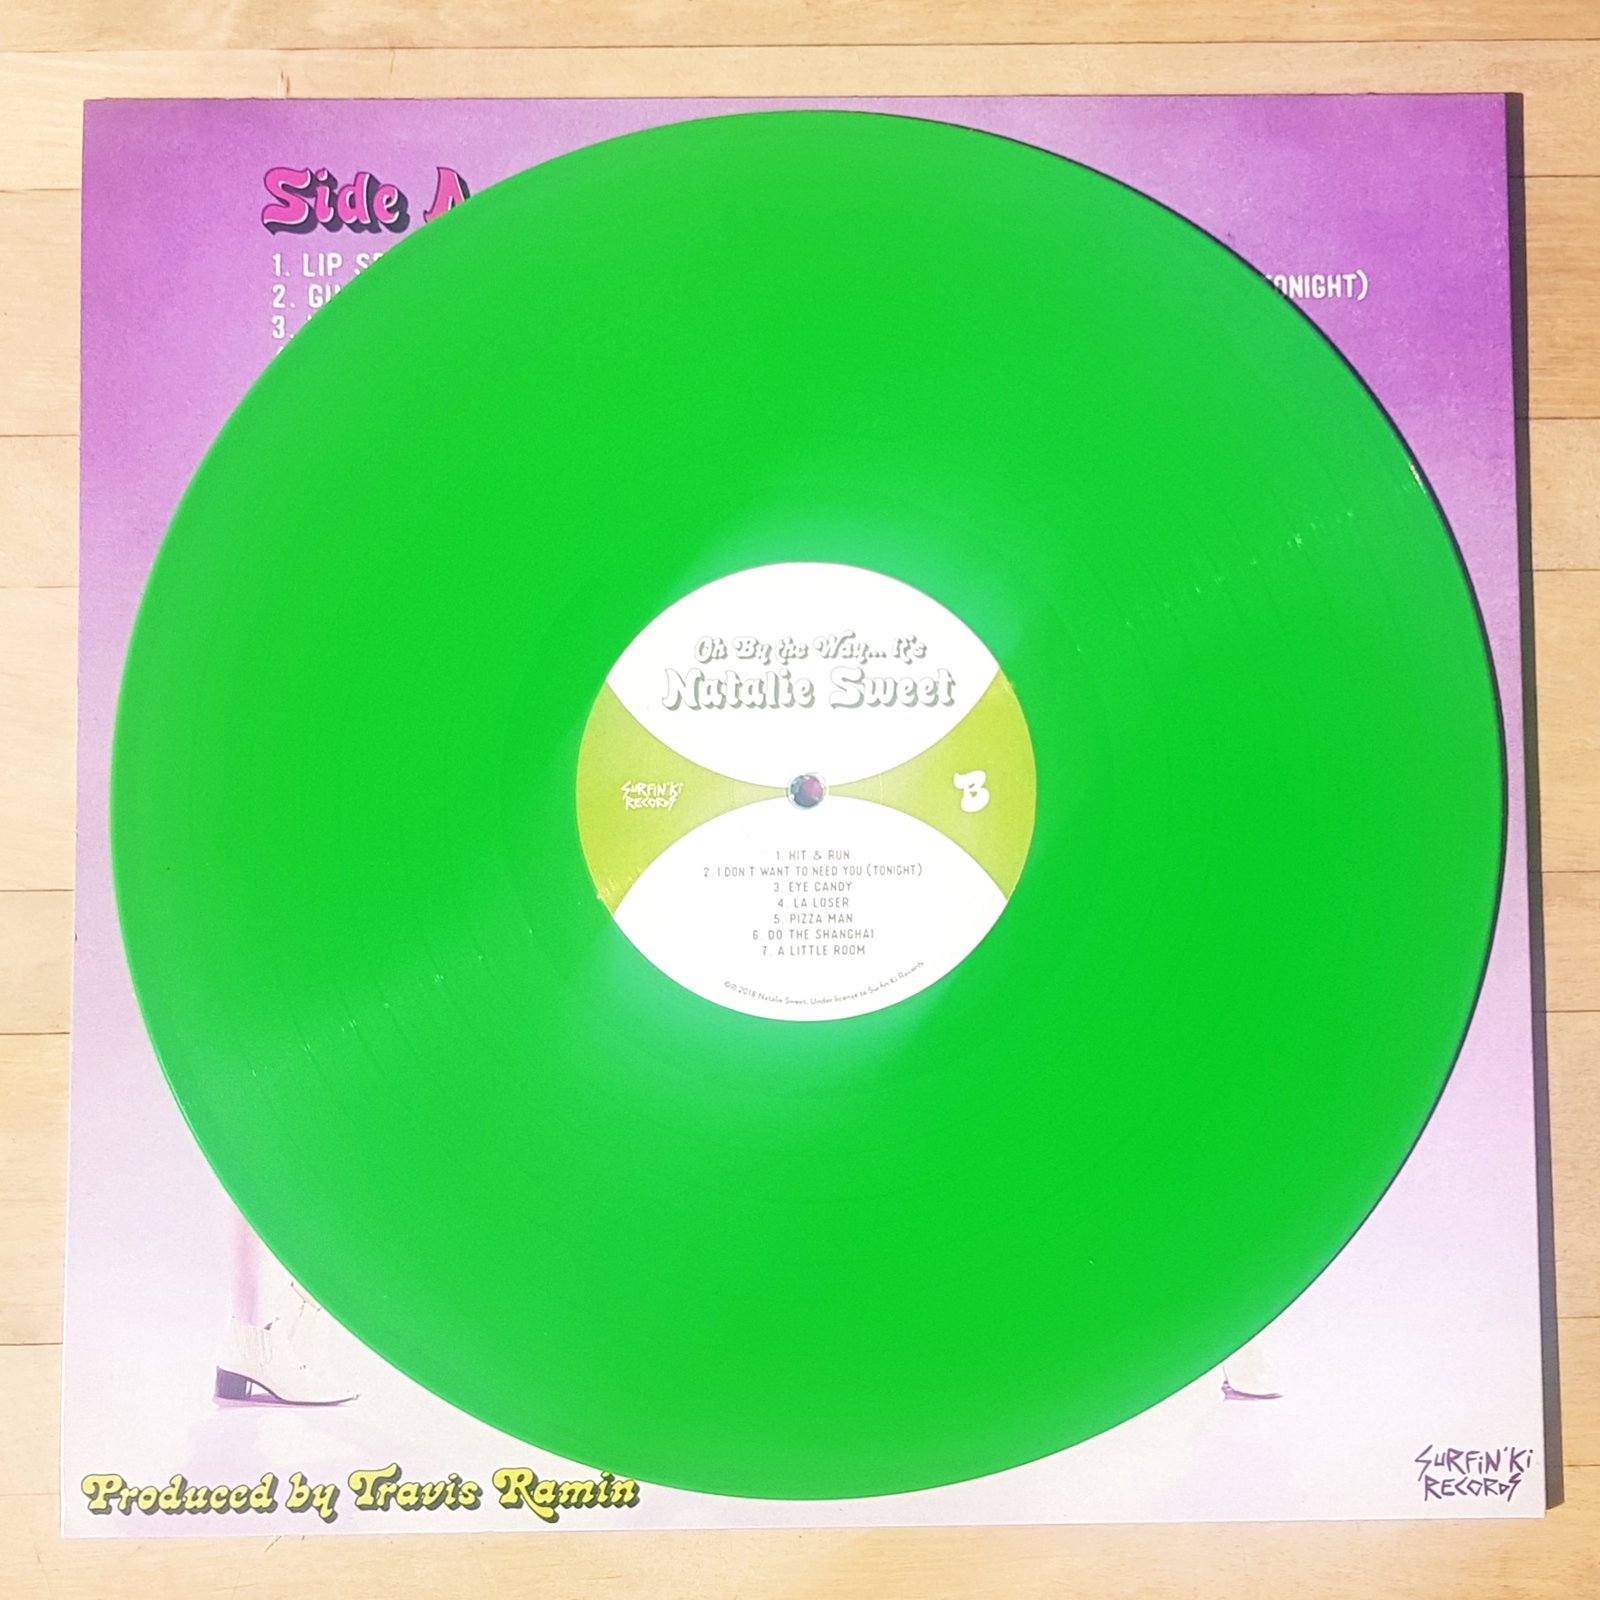 OH BY THE WAY... IT'S LP by NATALIE SWEET (the Shanghais) - 2ND PRESS on  GREEN VINYL! | Surfin' Ki Rec. Store!